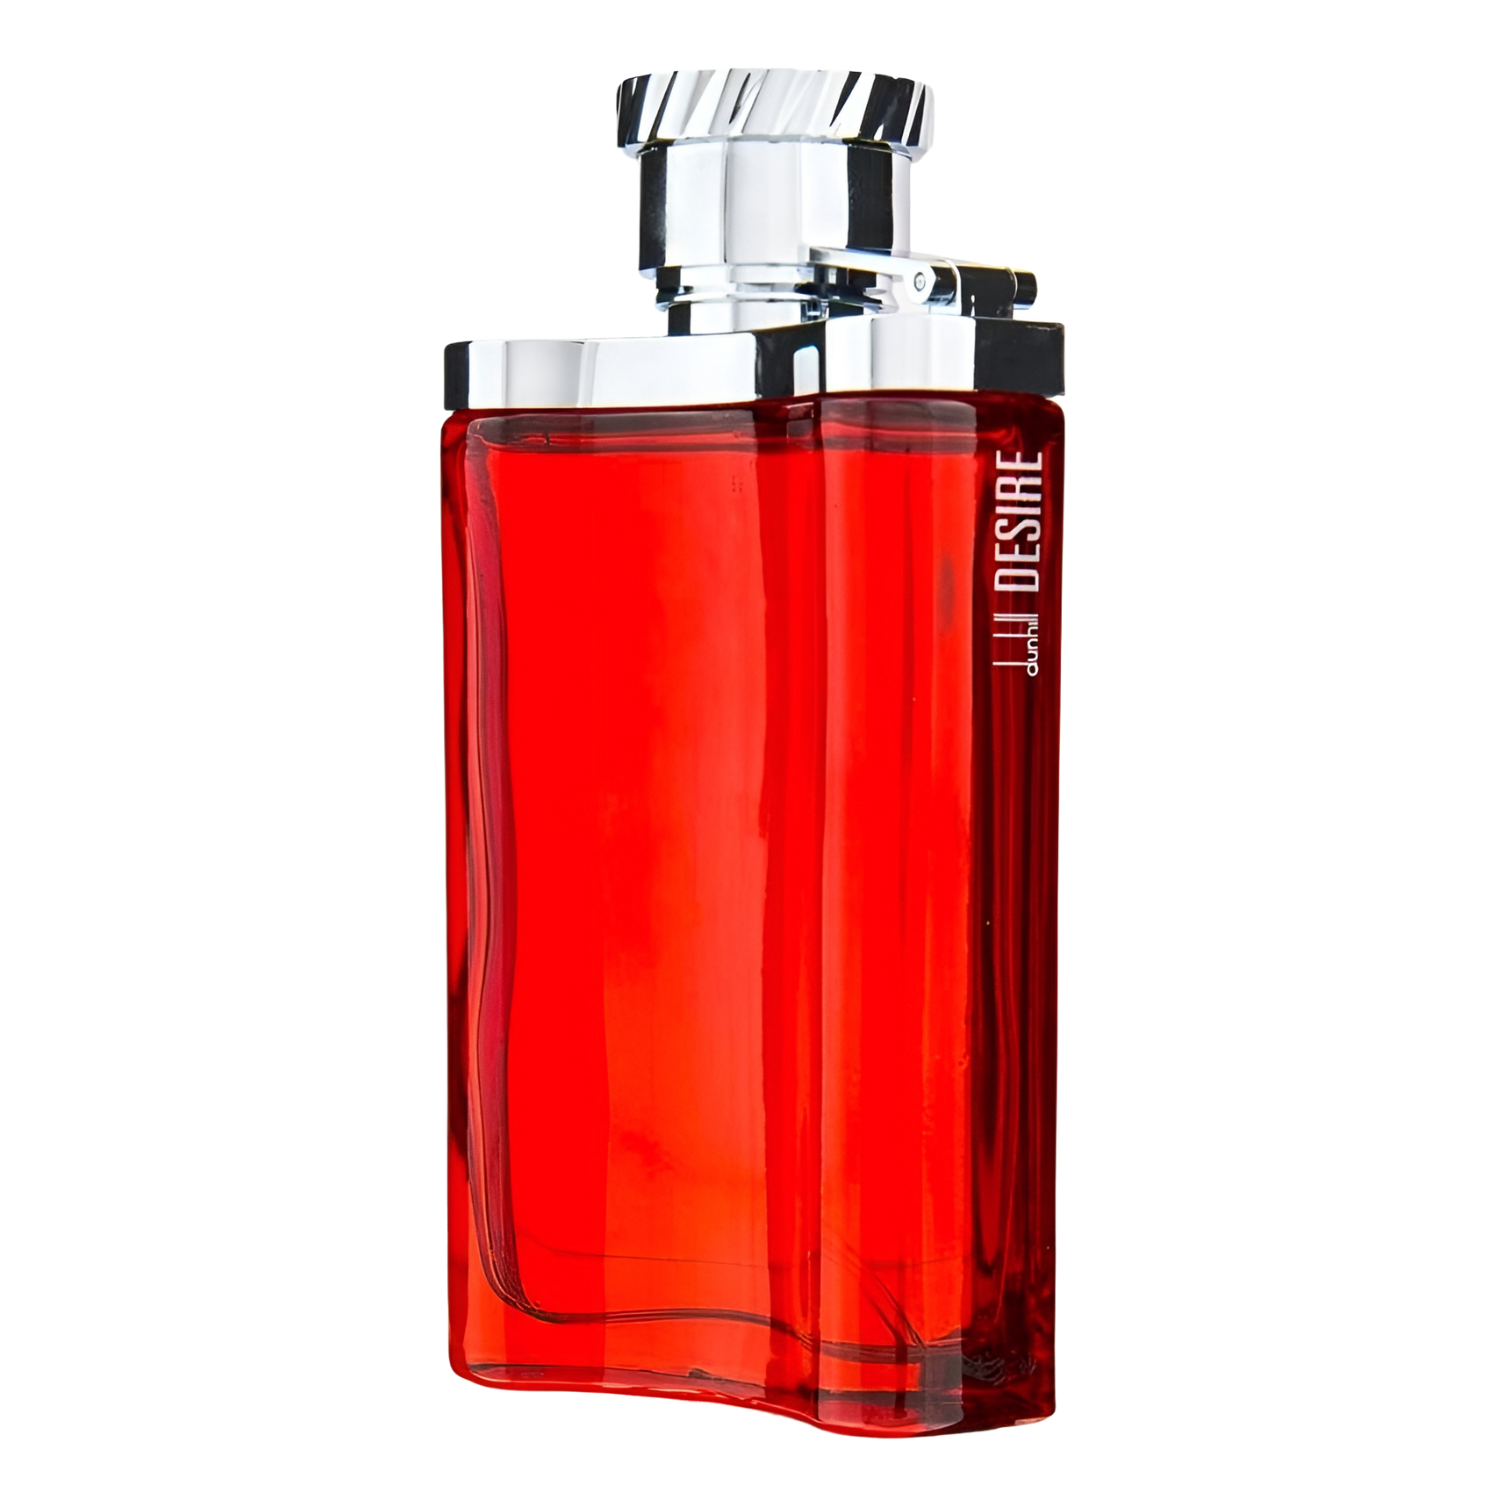 Dunhill Desire Red 100ml